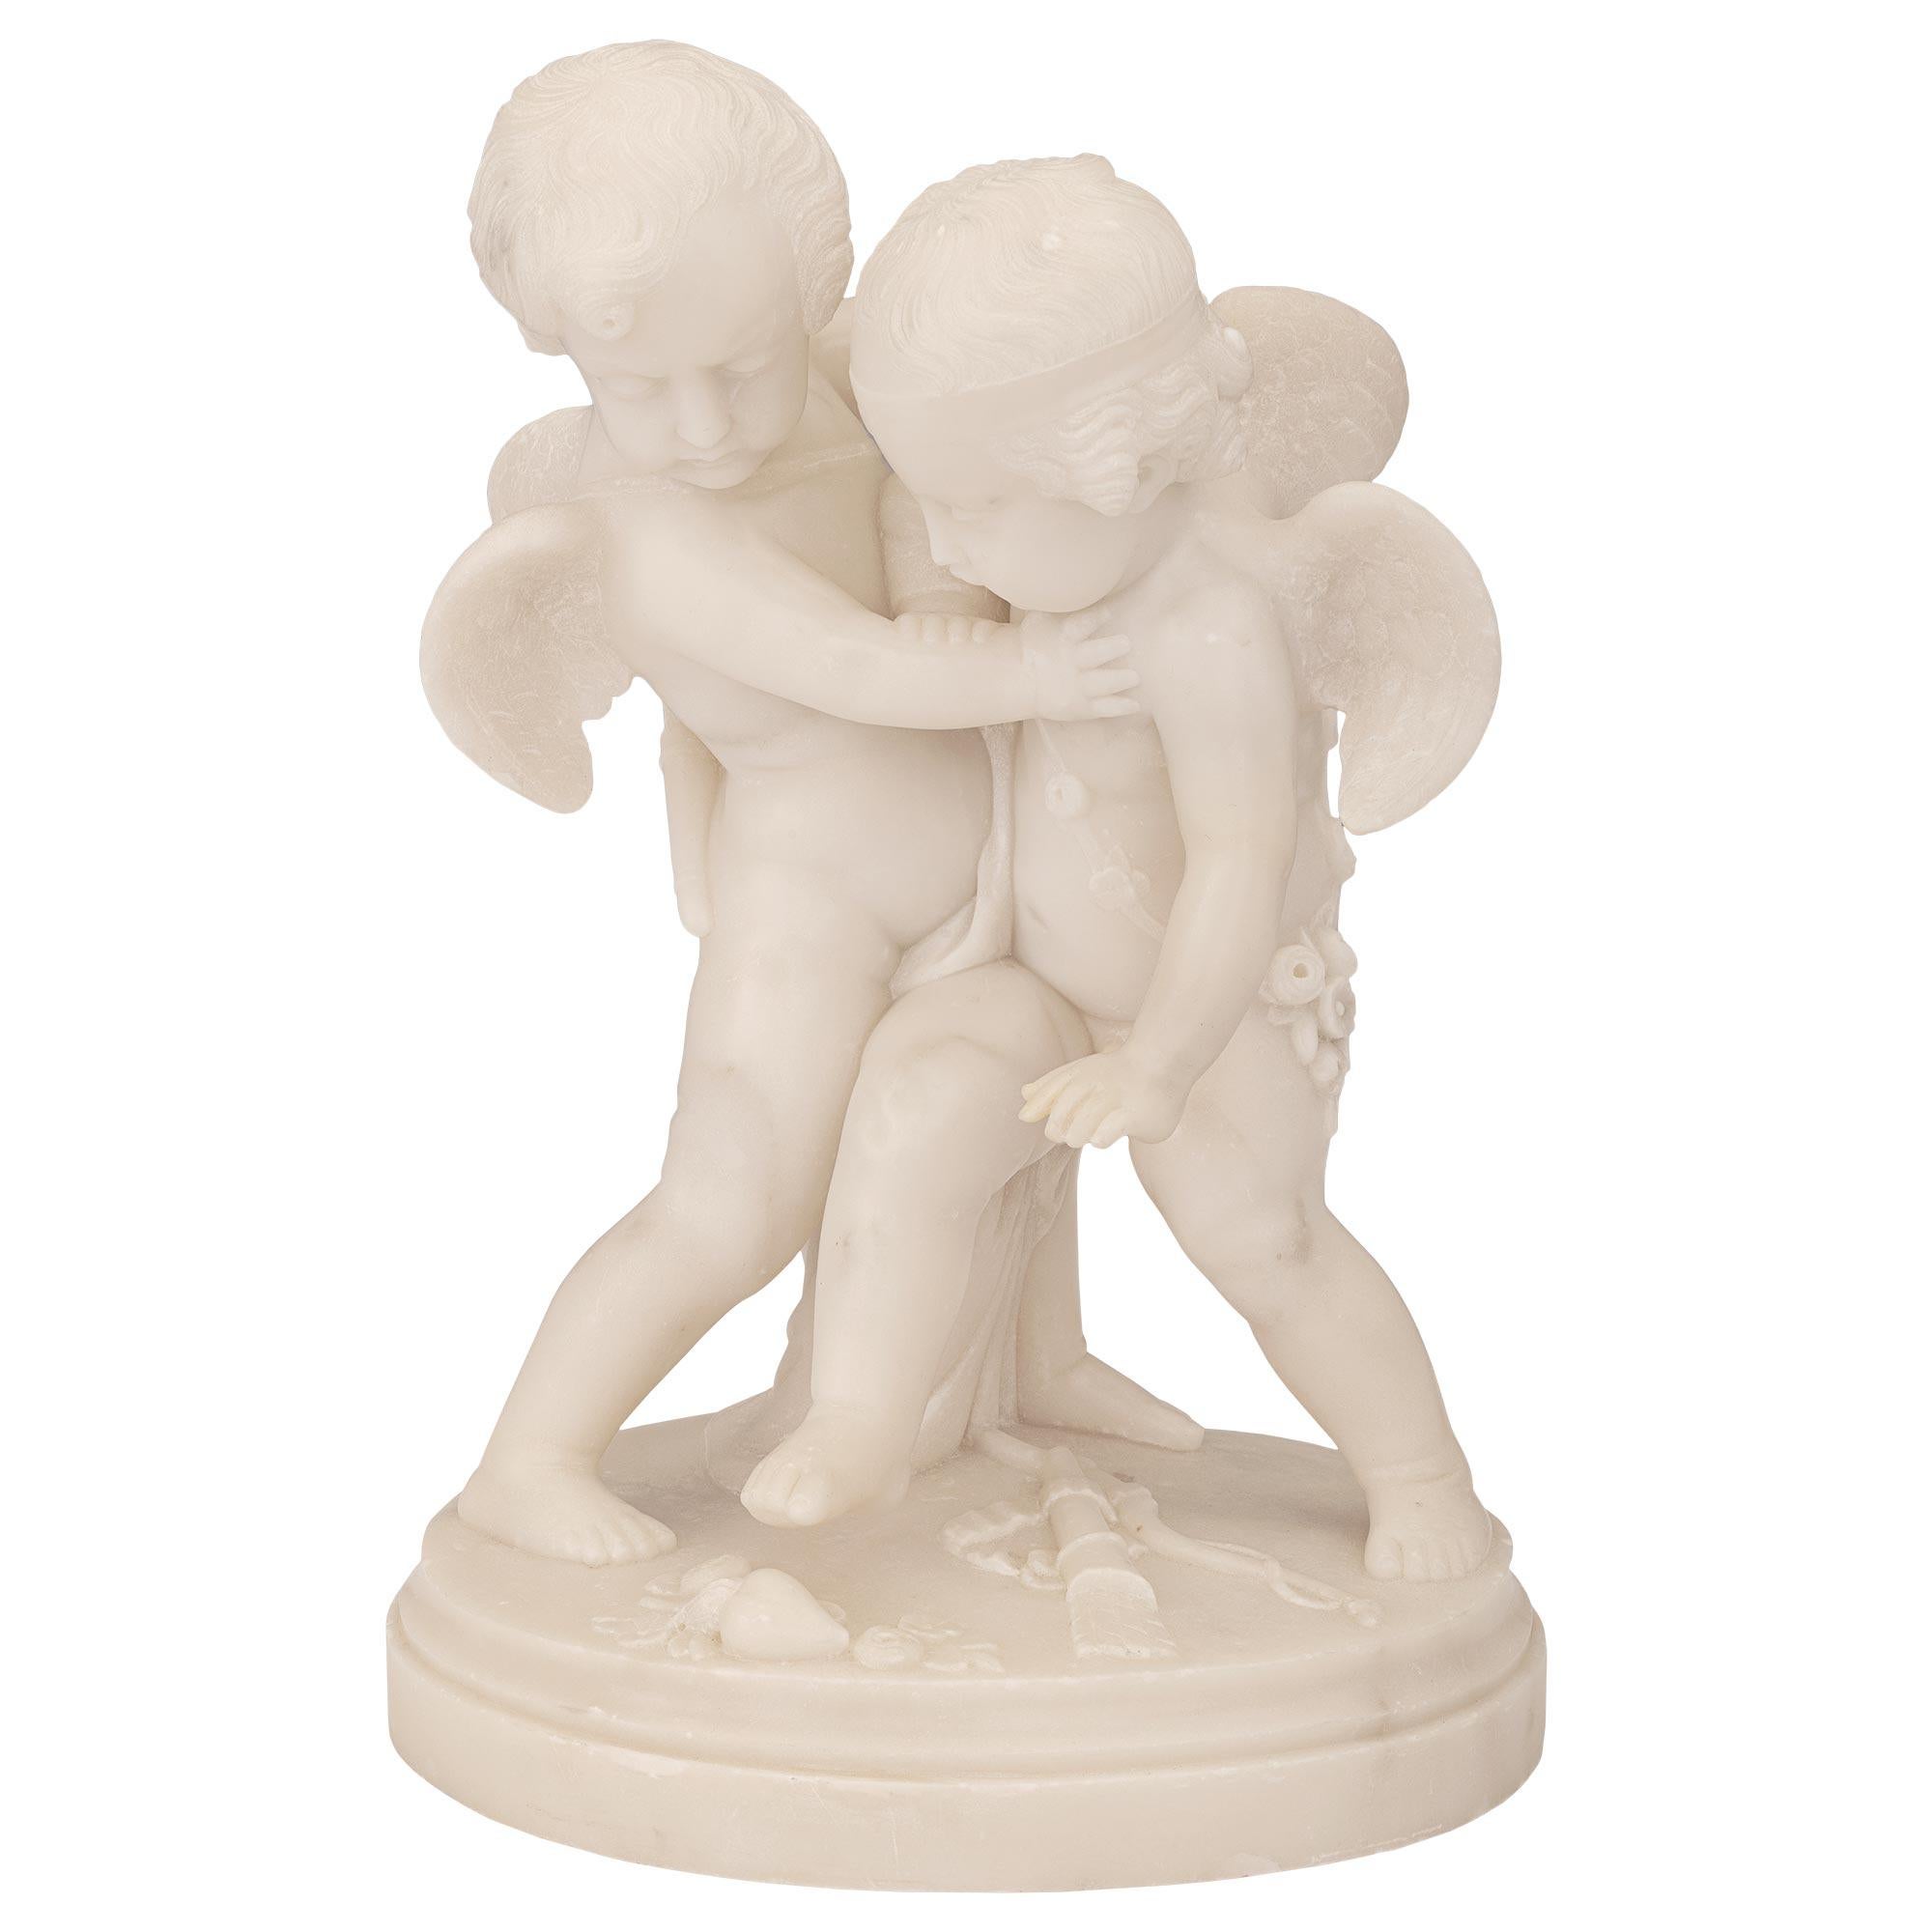 A beautiful and high quality French 19th century white Carrara marble statue of Eros and Anteros. The grouping of charming winged Putti is after a model by François-Joseph LeClercq of Eros and Anteros named: 